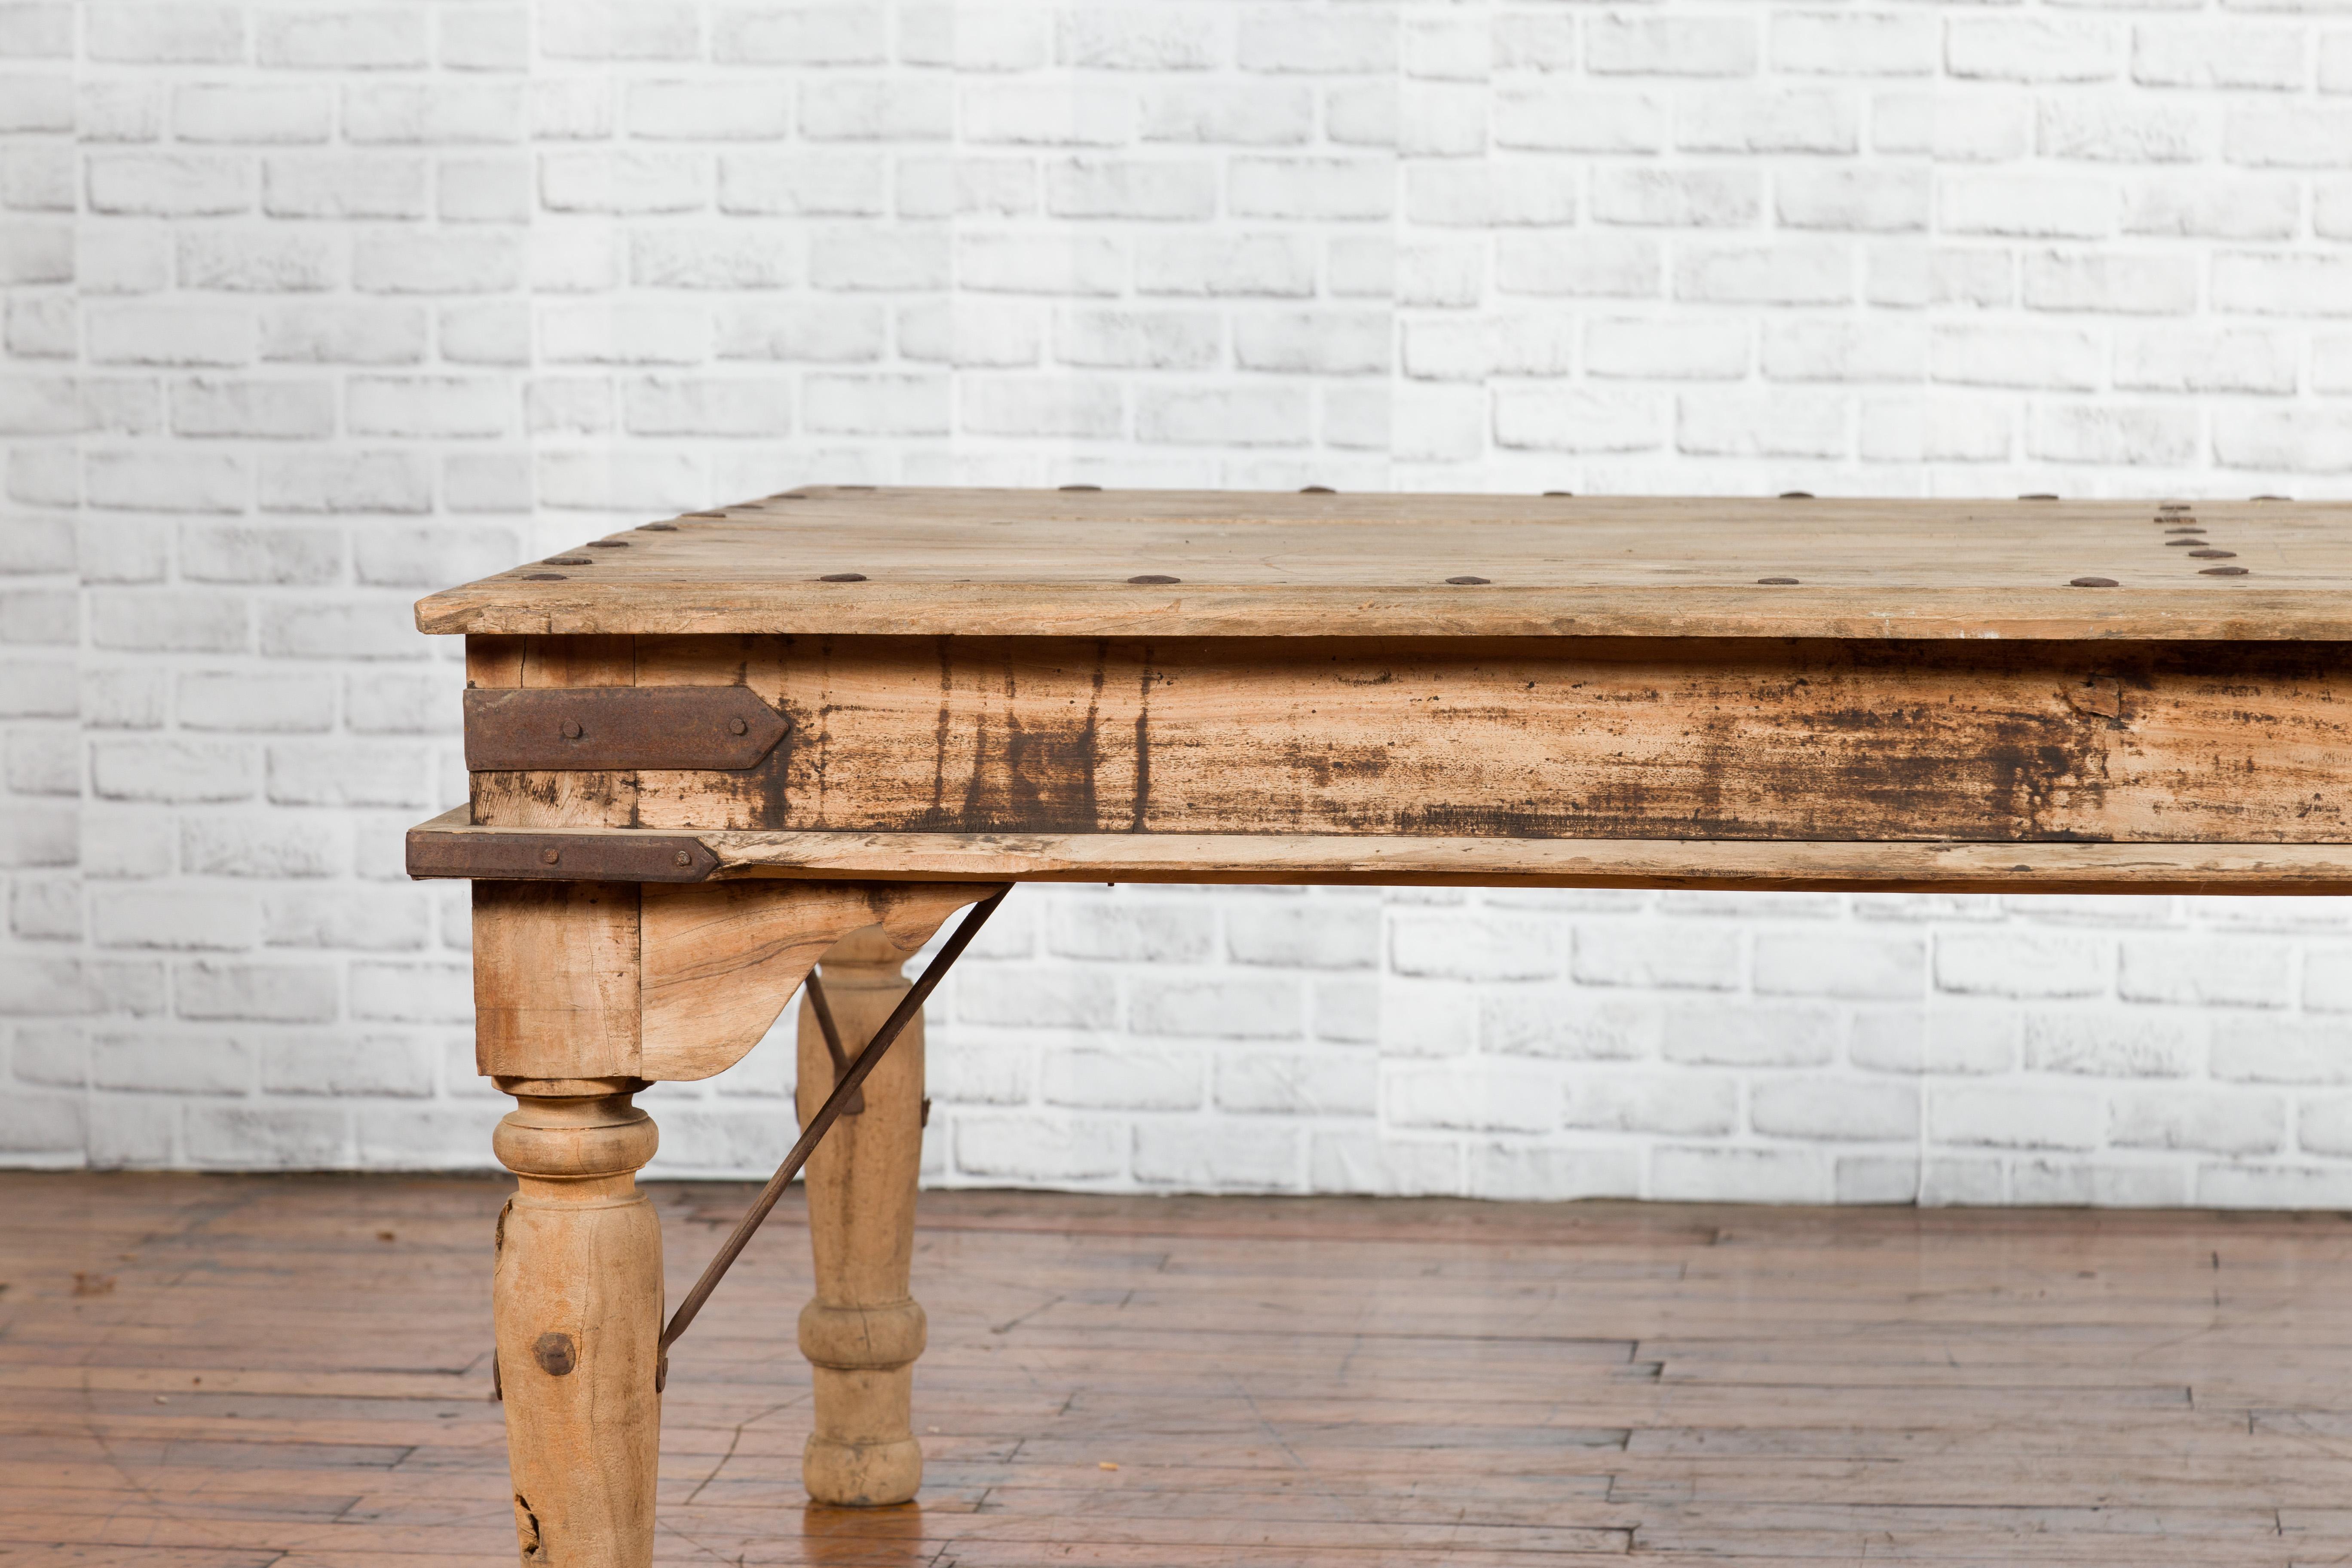 Rustic Indian Low Table with Distressed Patina, Iron Details and Baluster Legs For Sale 2